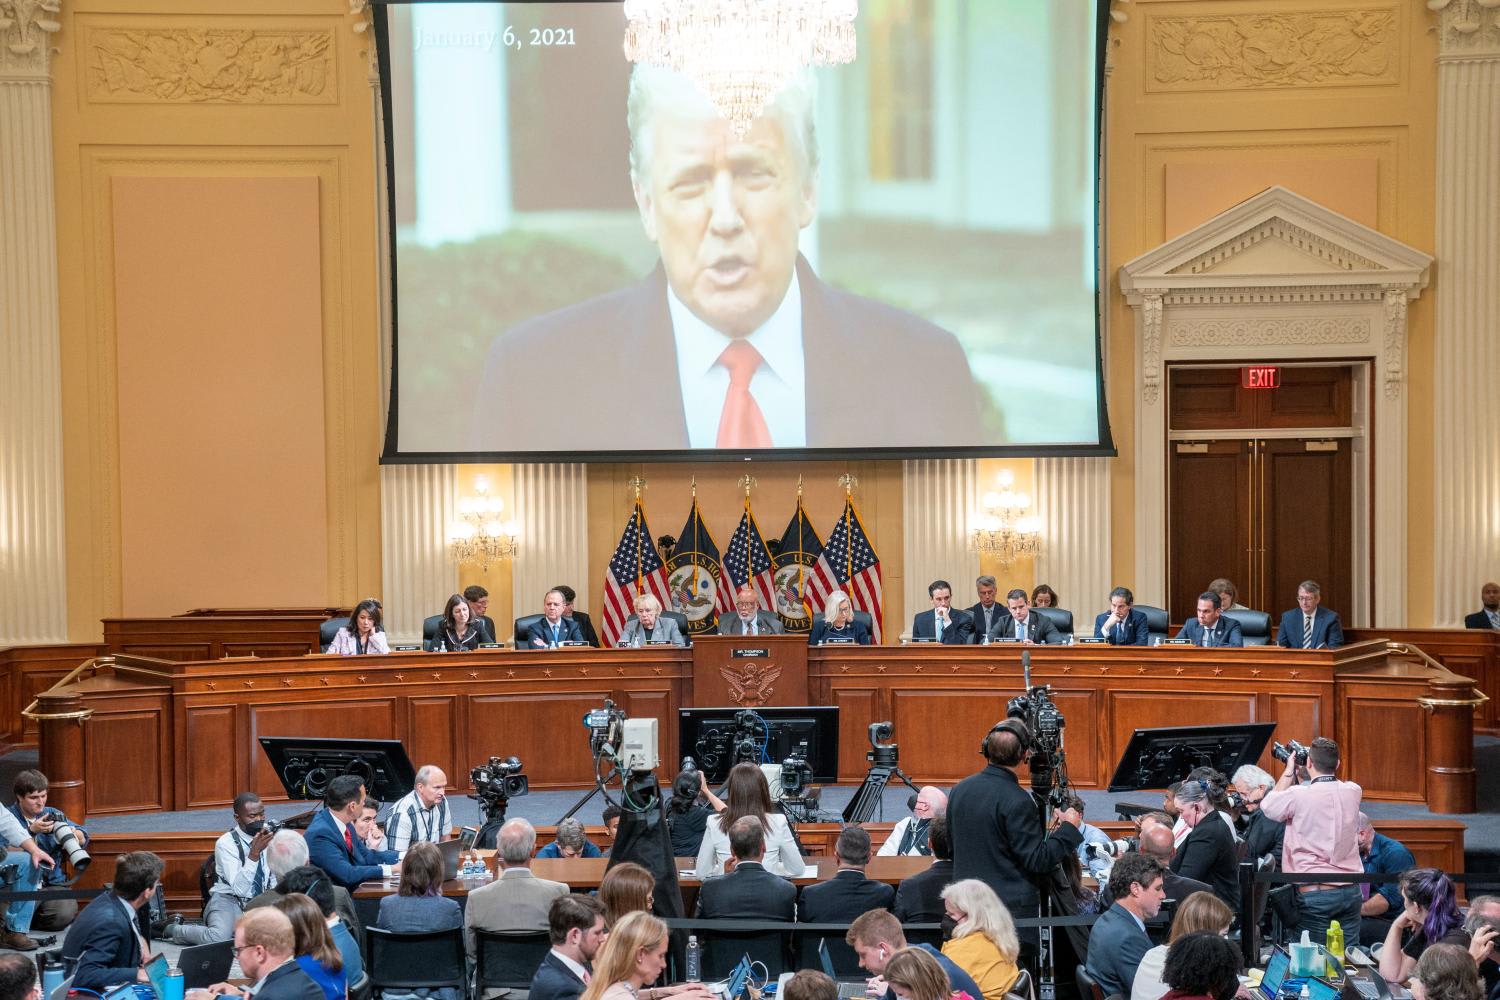 A video of former US President Donald&nbsp;Trump is played as Ms Cassidy Hutchinson, who was an aide to former White House Chief of Staff Mark Meadows during the&nbsp;Trump&nbsp;administration, testifies during House Select Committee a public hearing to investigate the January 6 Attack on the US Capitol, on June 28, 2022.